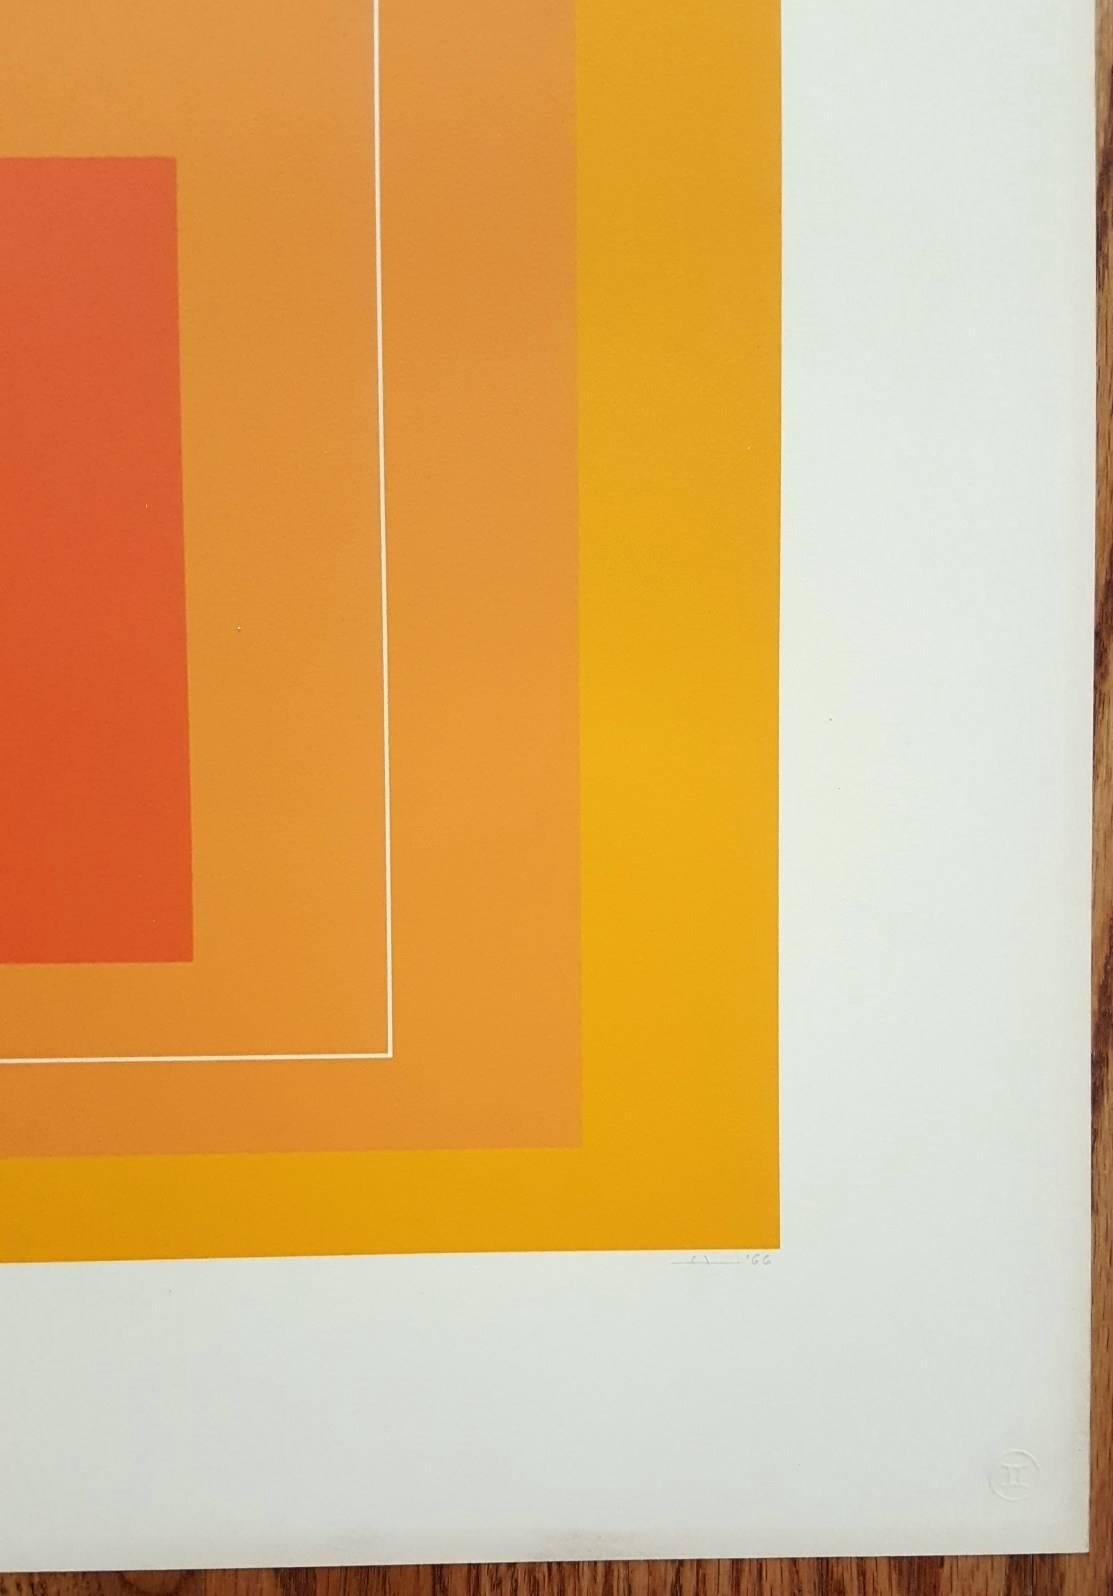 An original signed three color lithograph by German-American artist Josef Albers (1888-1976) titled "WLS VI (White Line Squares Series I)", 1966. Portfolio/Series: "White Line Squares (Series I)", 6 of 8 in the Portfolio. Printed